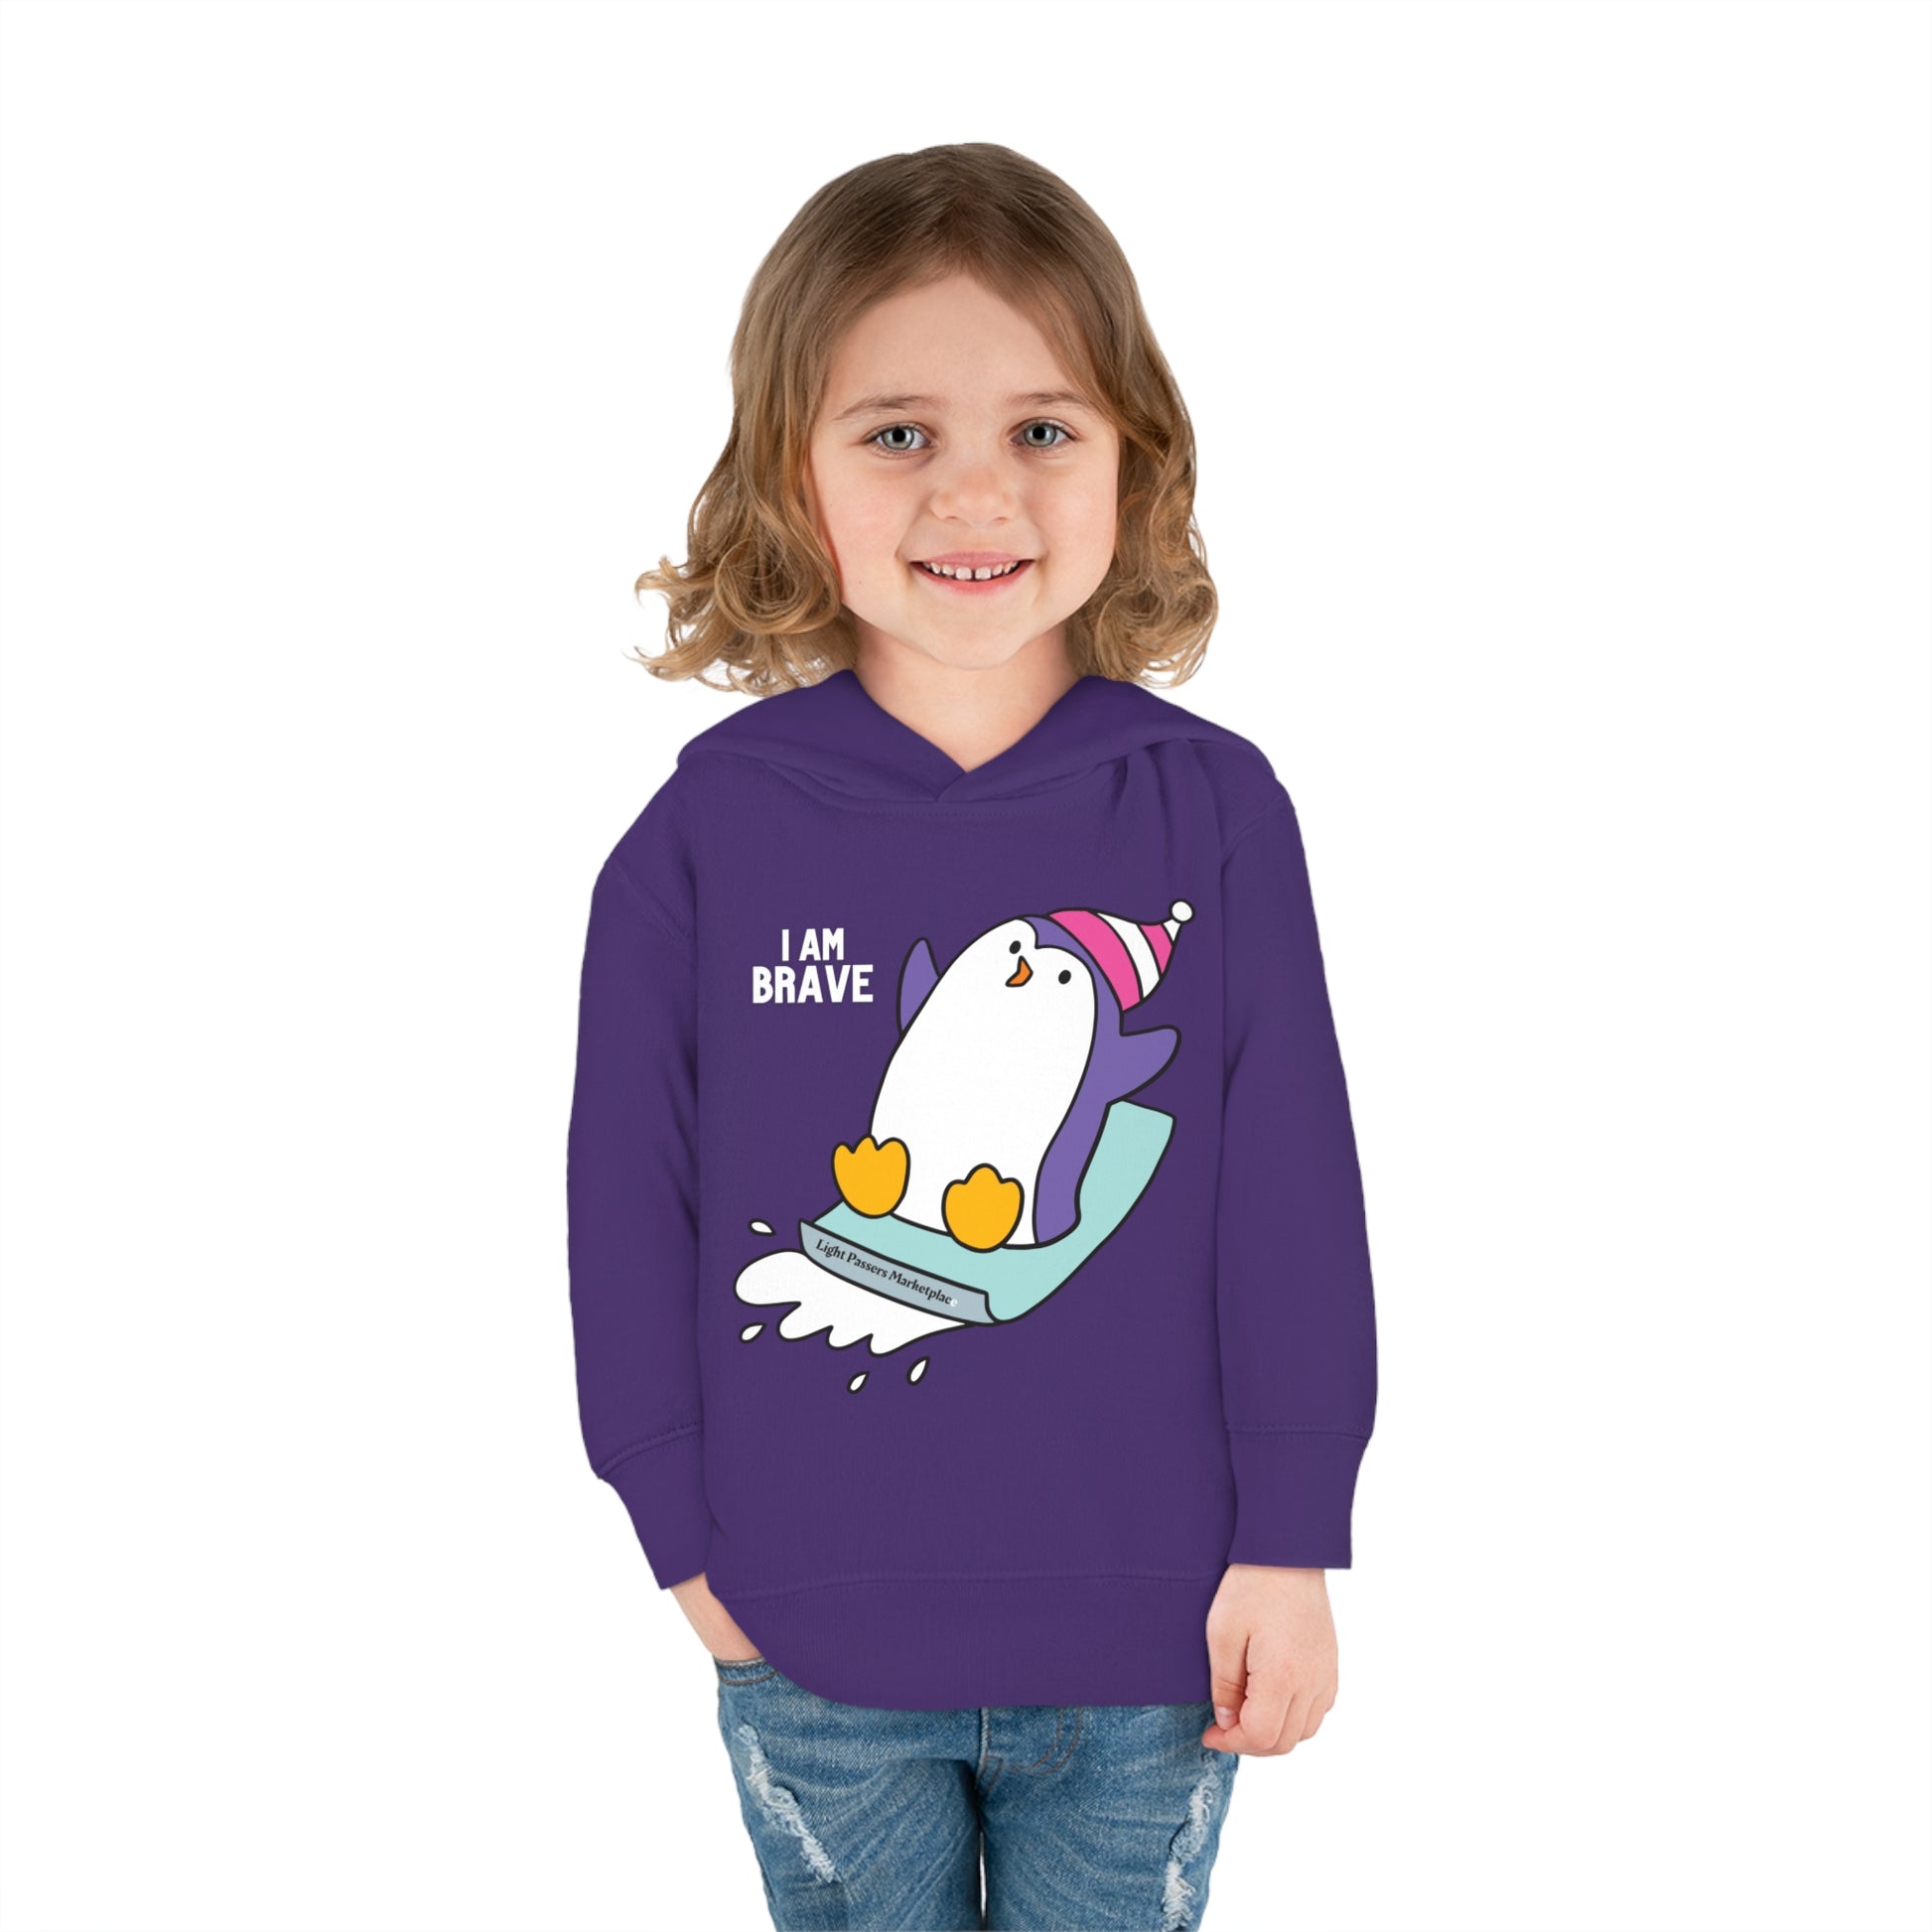 Toddler hoodie with a girl smiling, featuring a cartoon penguin design. Jersey-lined hood, cover-stitched details, side seam pockets for comfort and durability. Made of 60% cotton, 40% polyester.